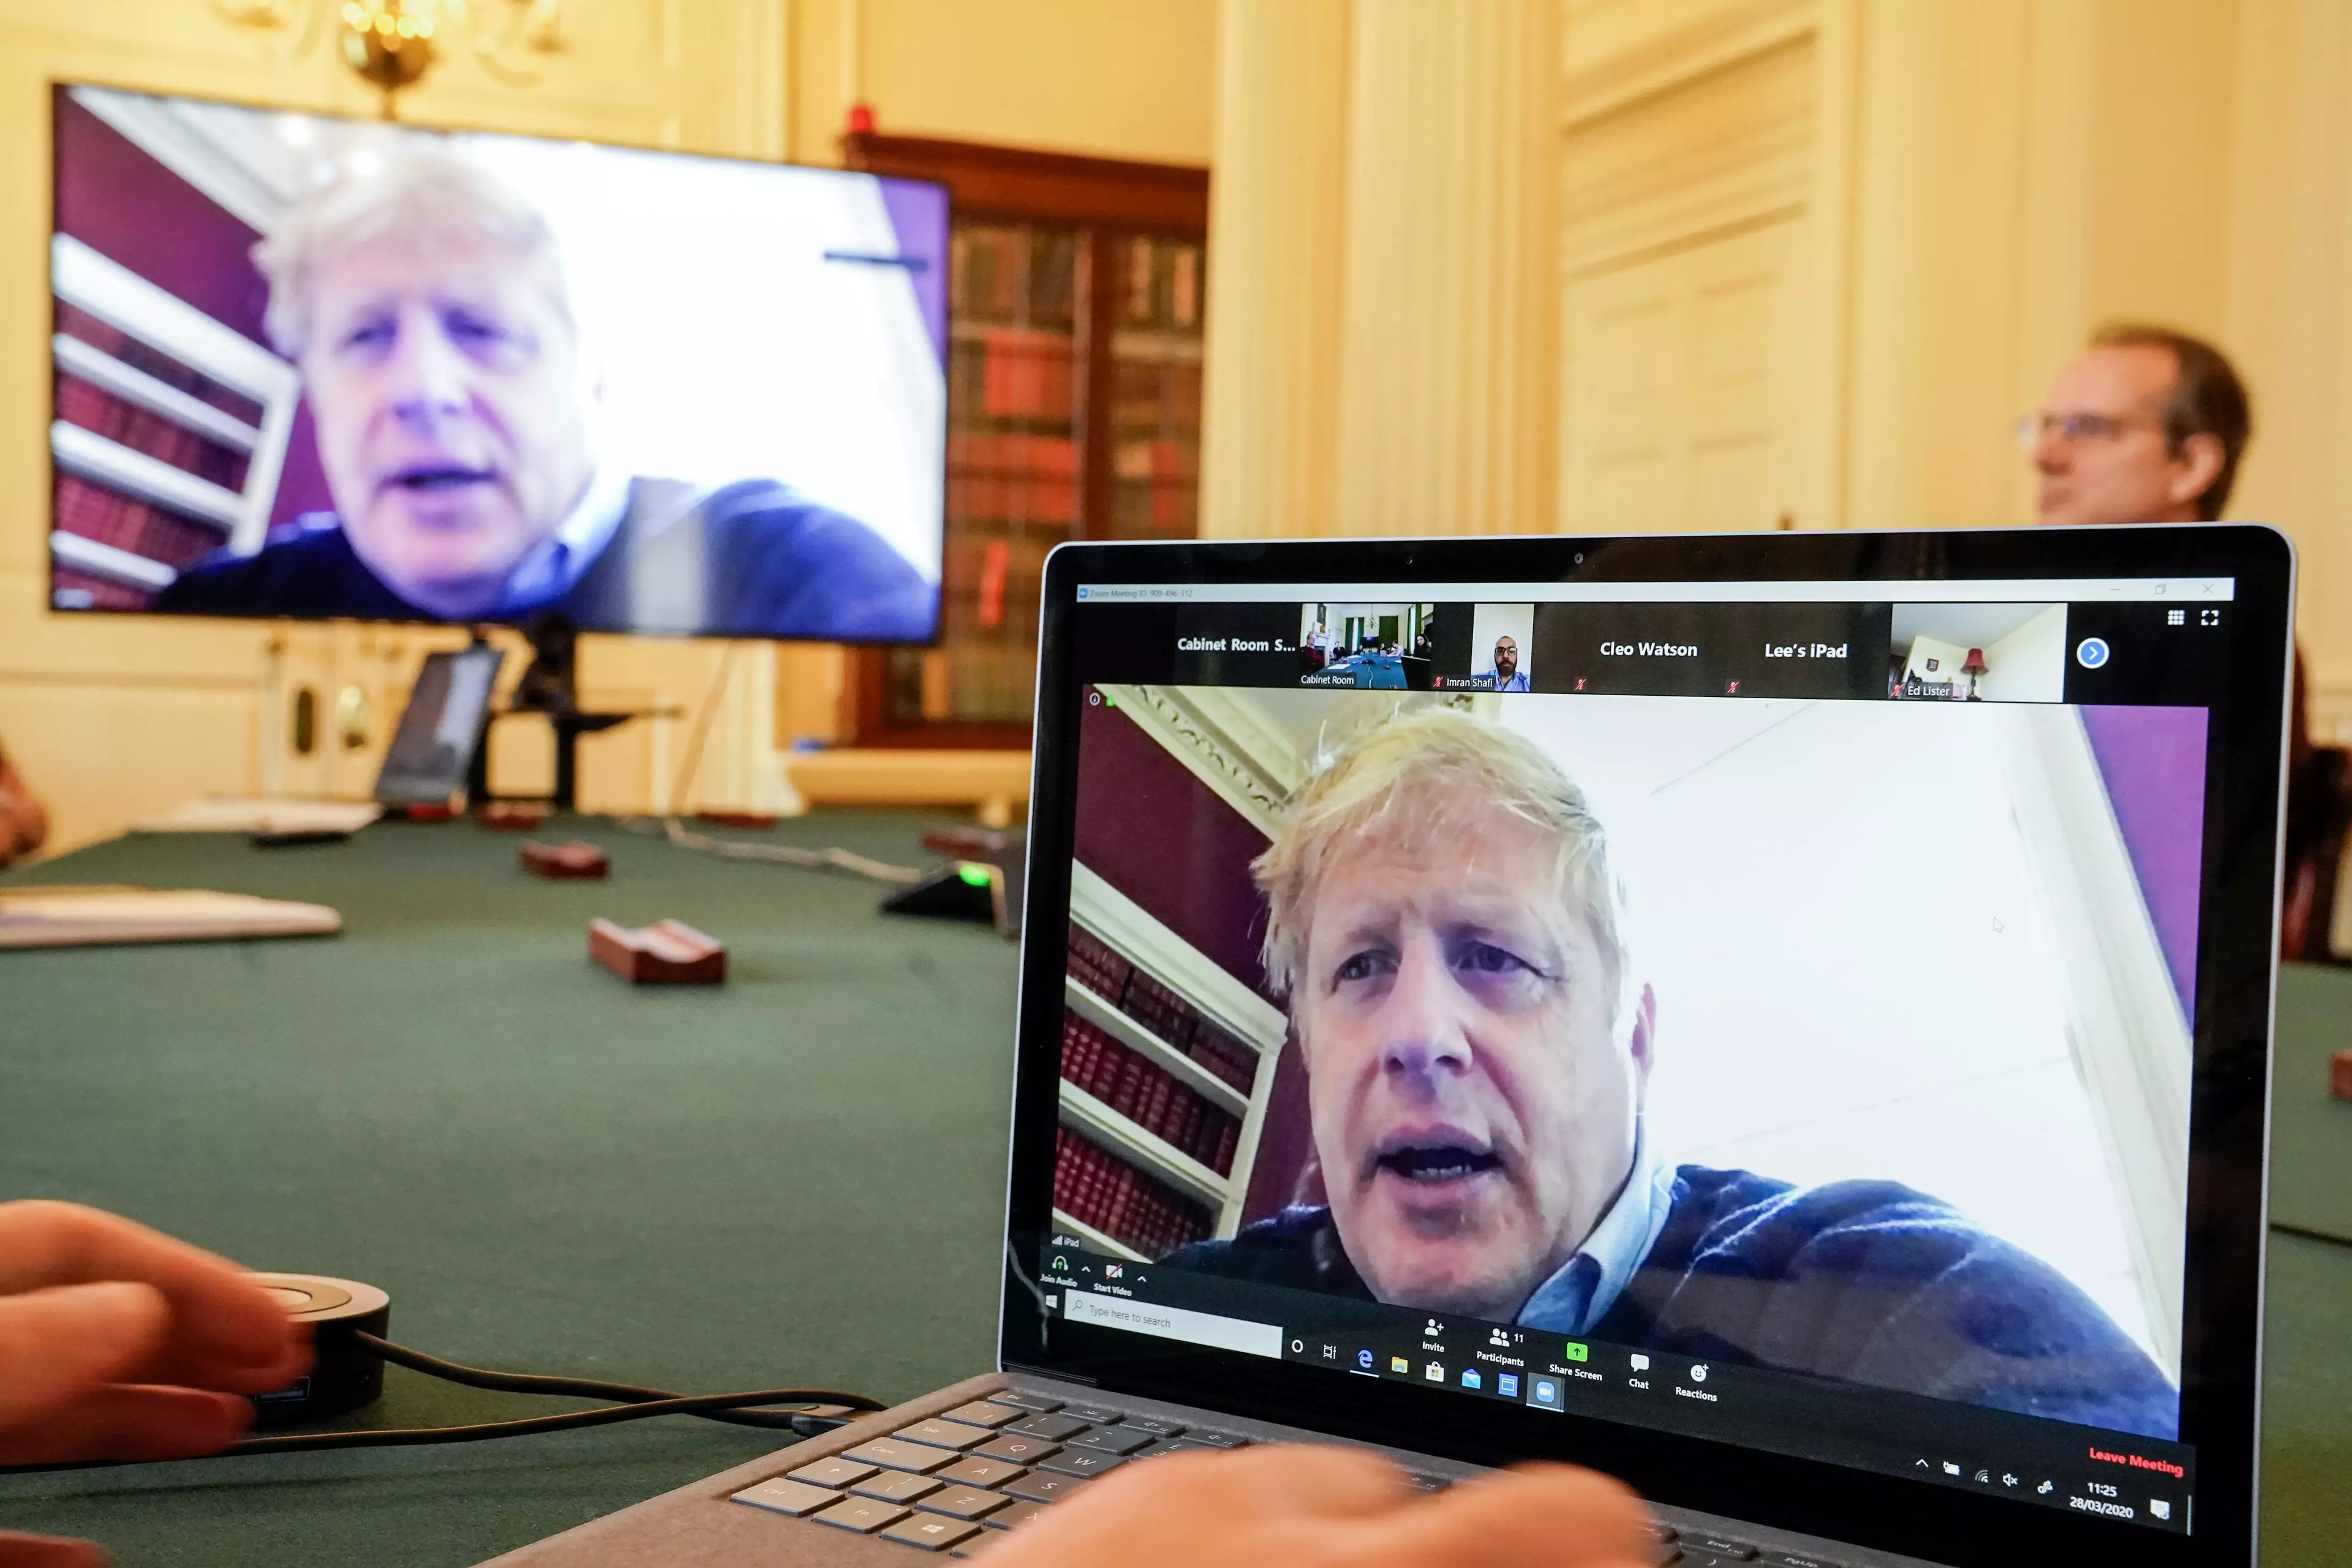 Mr Johnson had been conducting government work from home before being admitted to hospital.